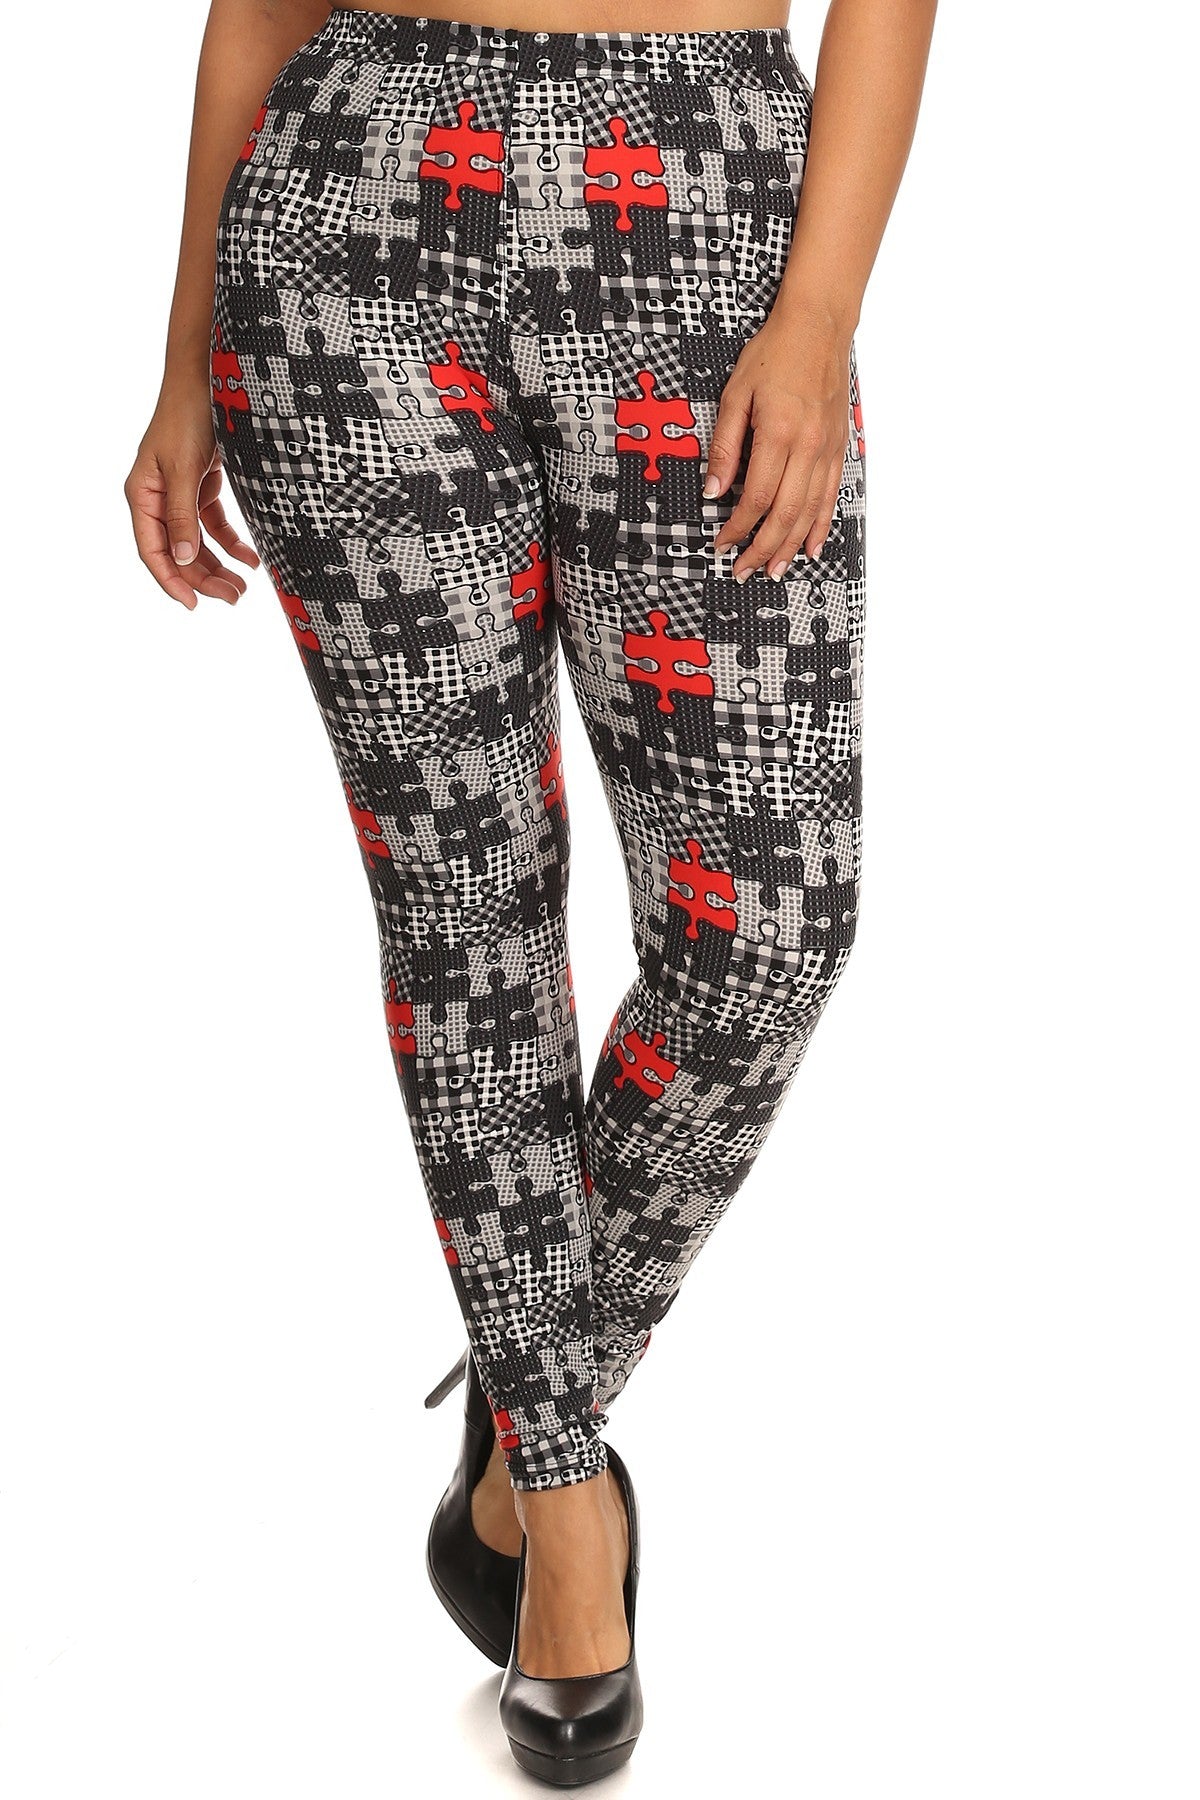 Plus Size Puzzle/plaid Print, Full Length Leggings In A Slim Fitting Style With A Banded High Waist - Keep It Tees Shop